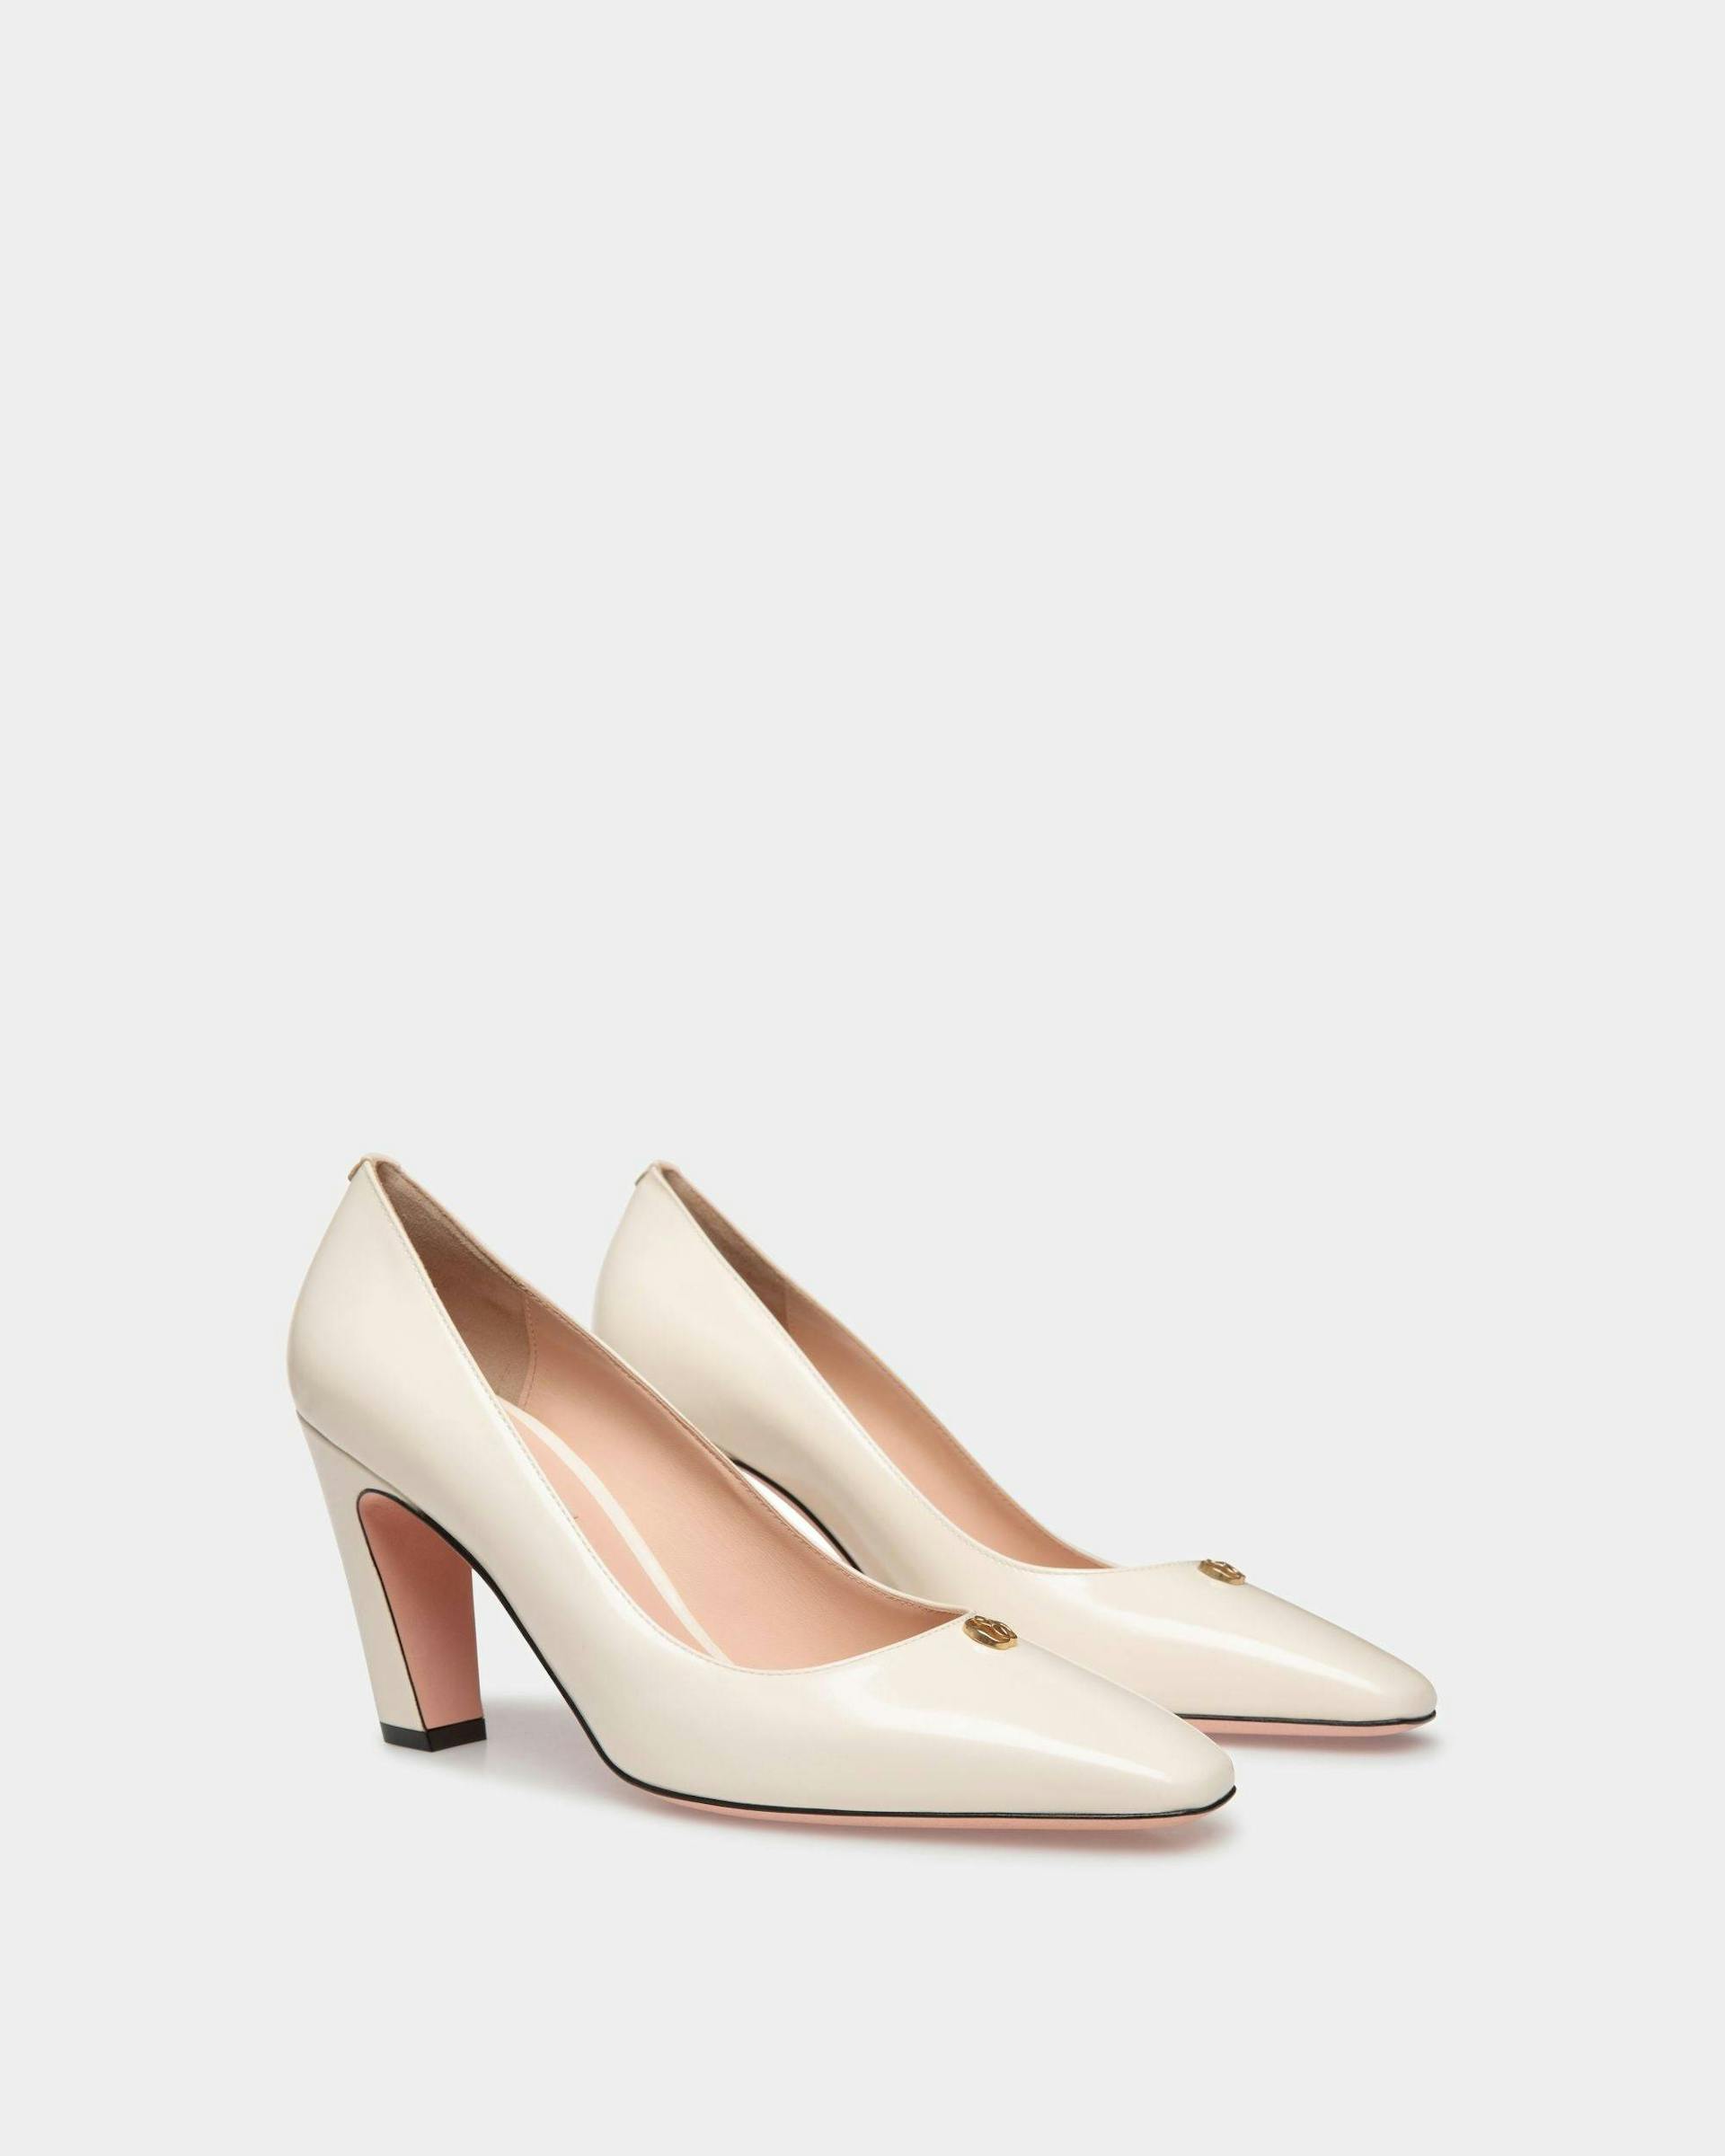 Women's Sylt Pump In White Leather | Bally | Still Life 3/4 Front